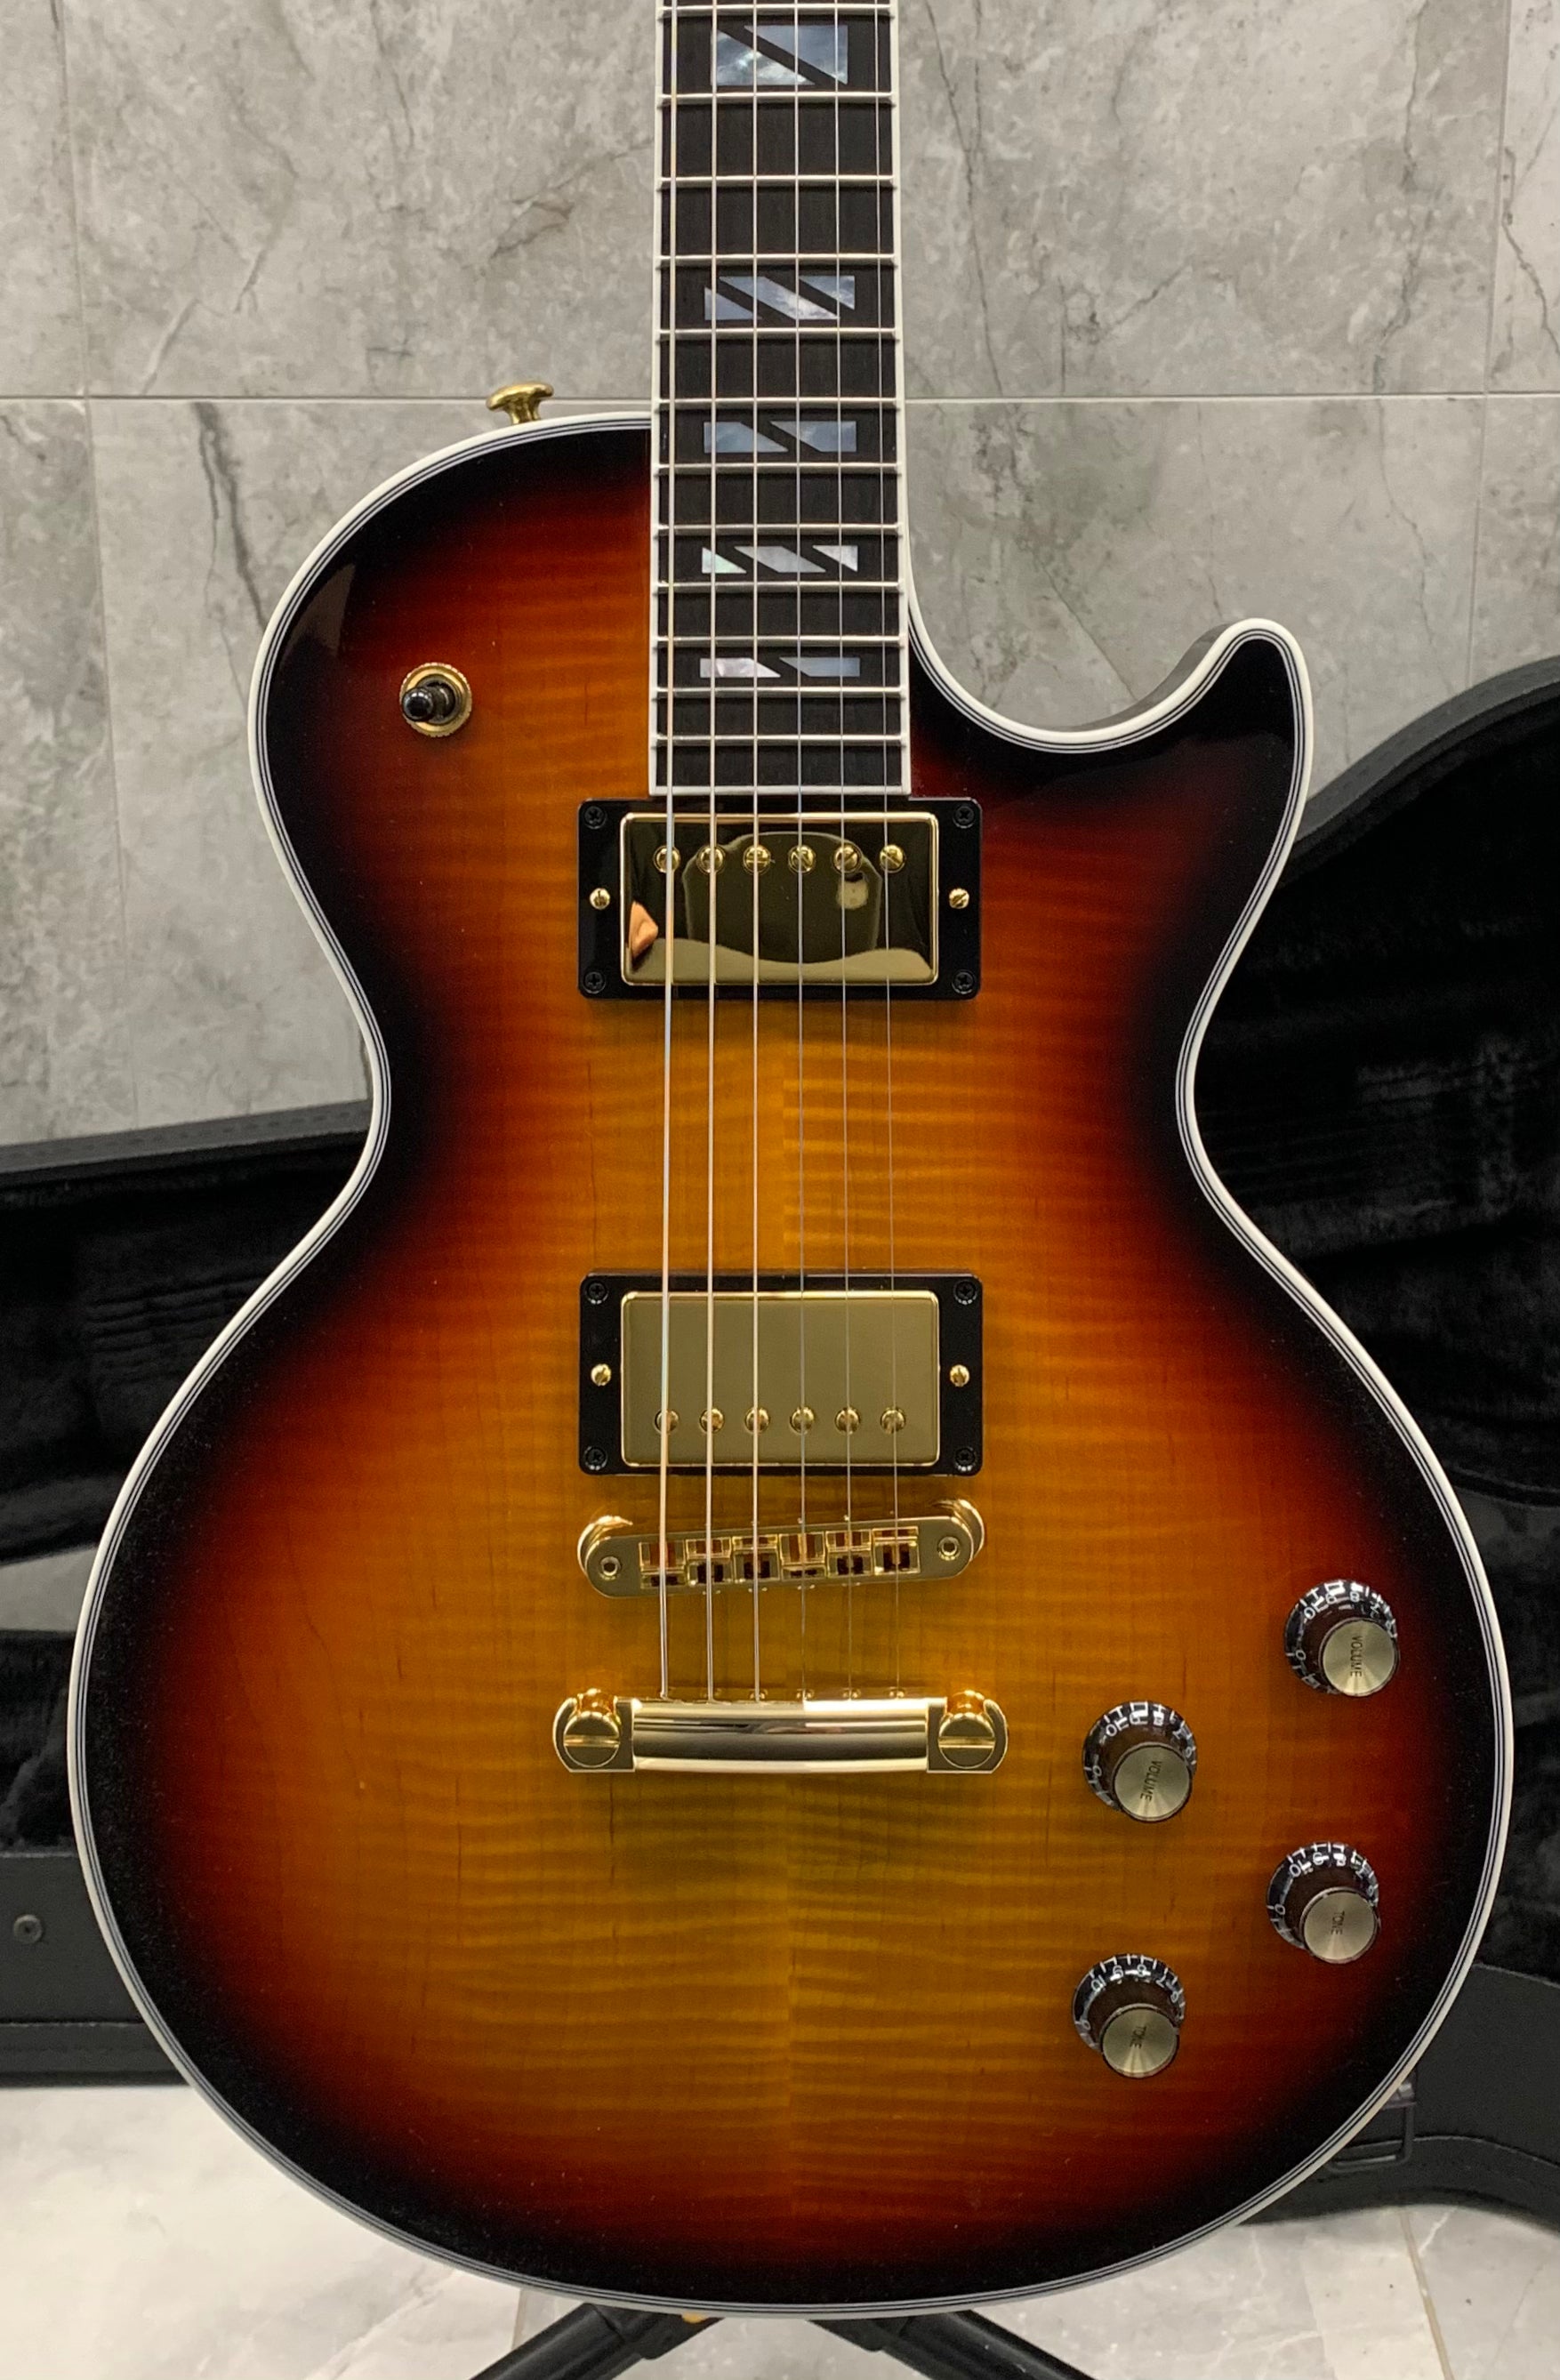 Gibson Les Paul Supreme - Fireburst LPSU00FIGH SERIAL NUMBER 200640180 - 7.9 LBS